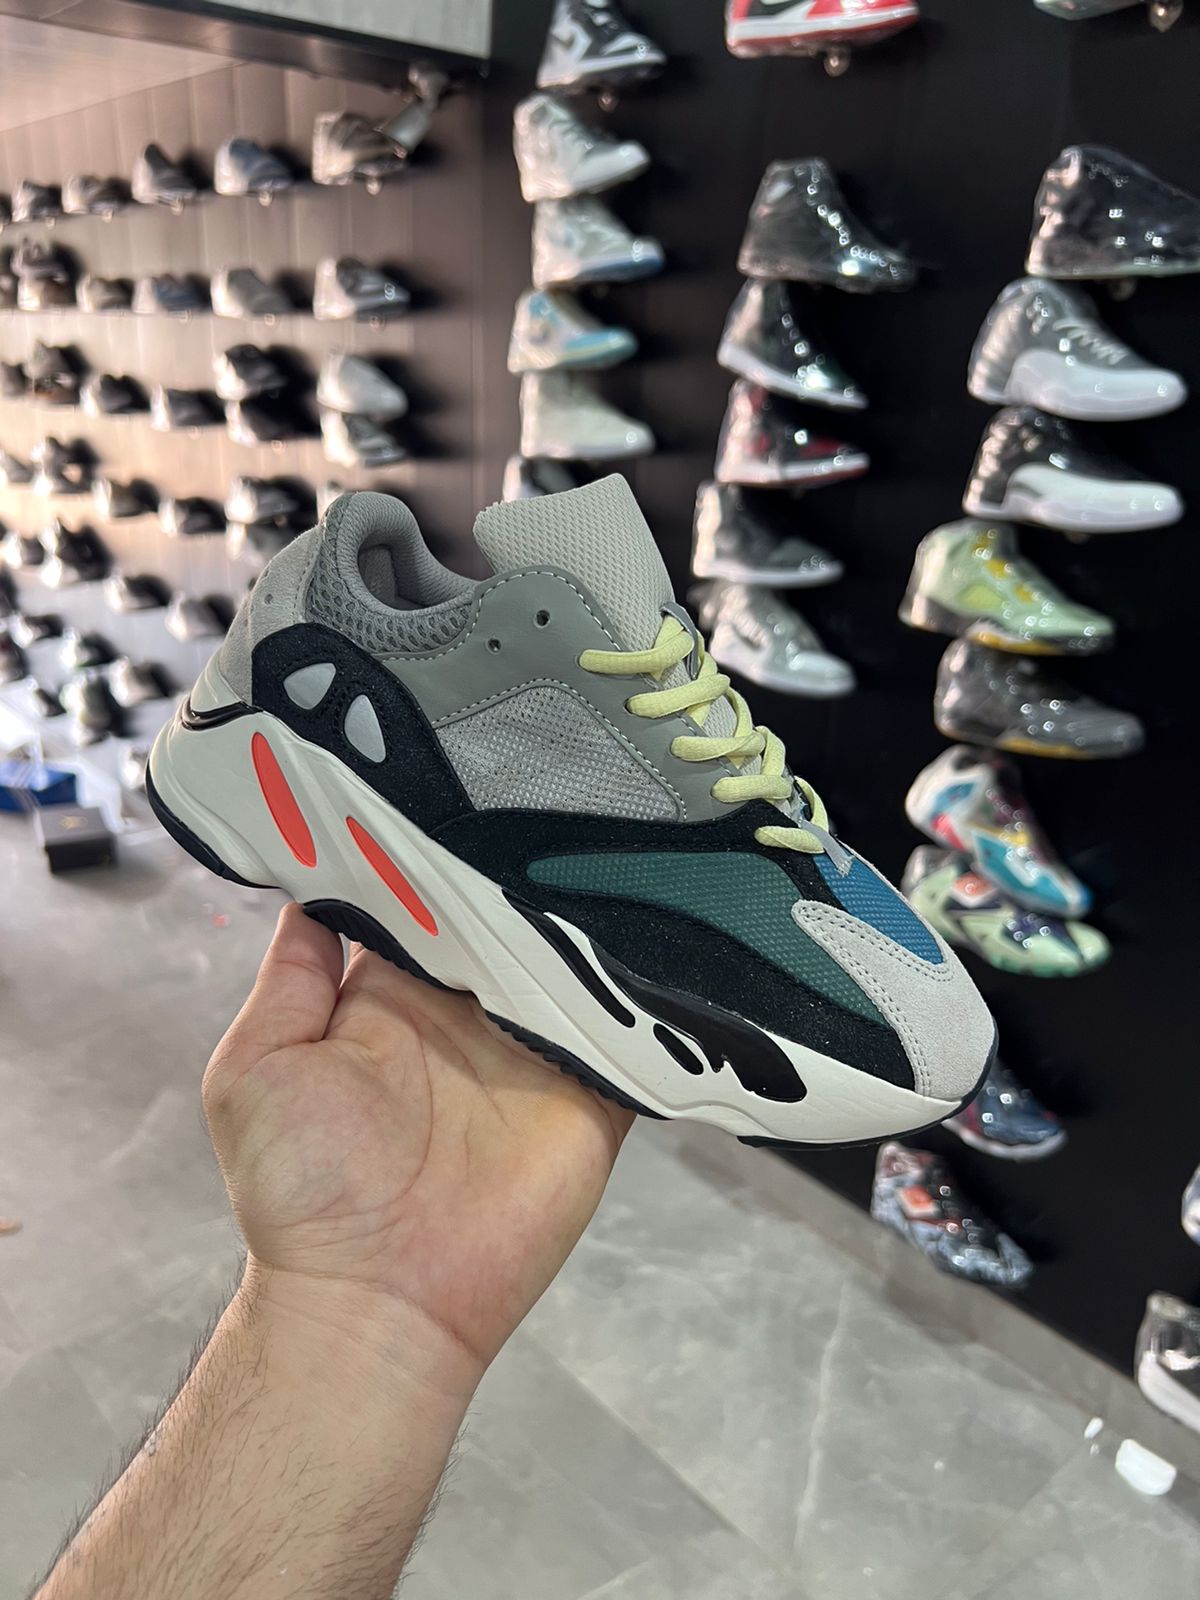 Yeezy Boost 700 Running Shoes